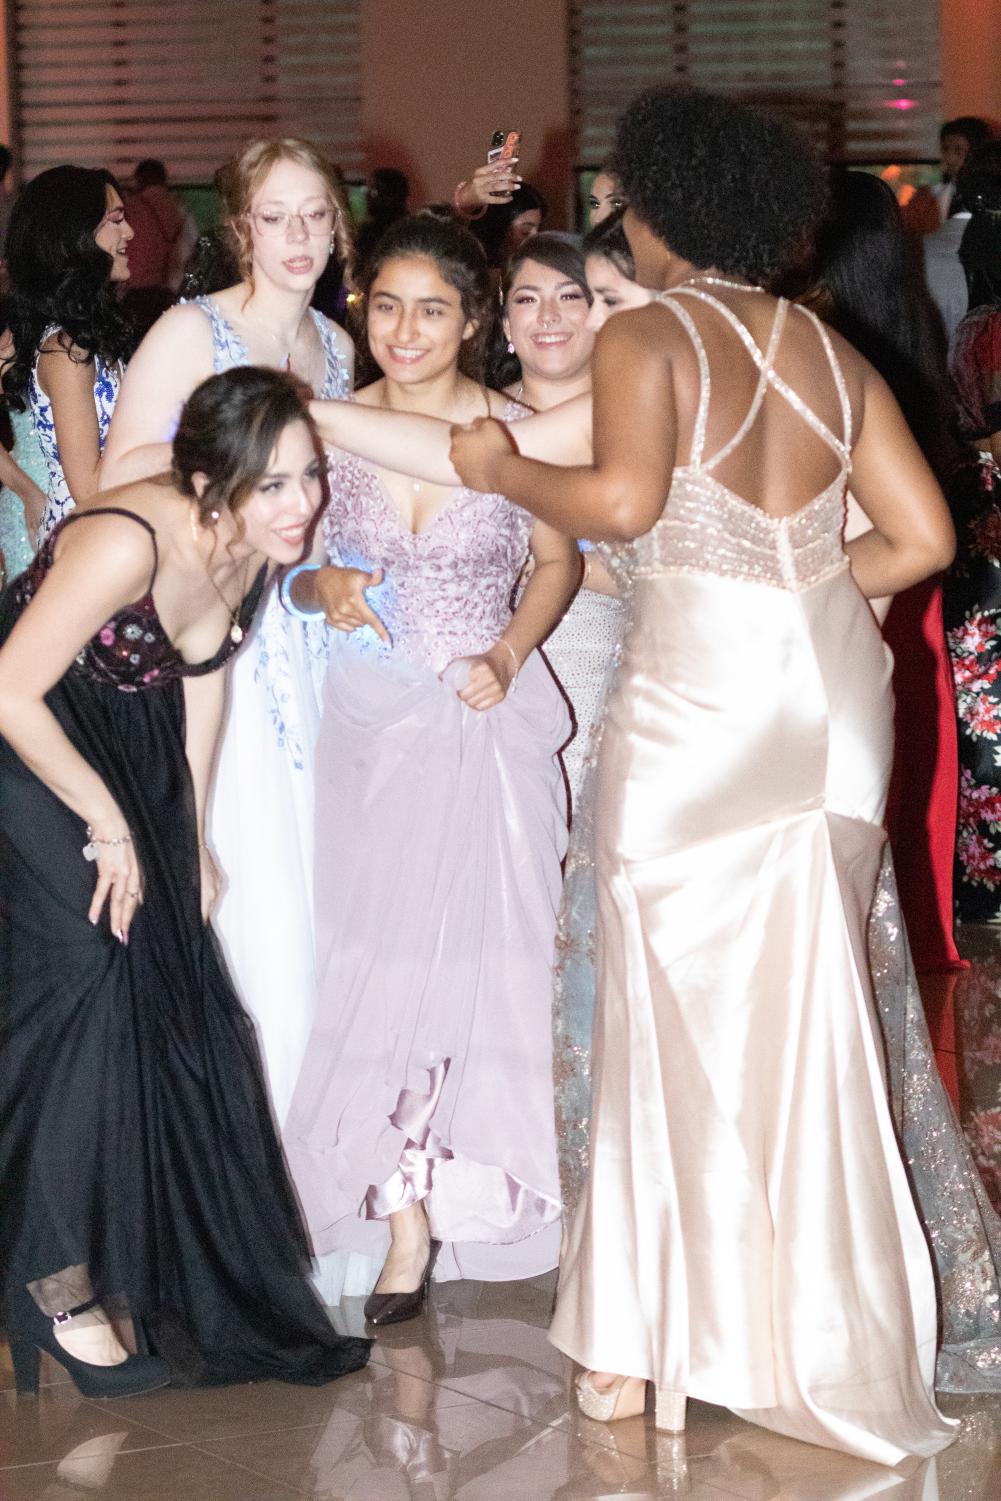 Starting from the Left- Iris Romero, Kiera Quinlan, Marissa Casares and Ayanna Wash at last year’s prom. 